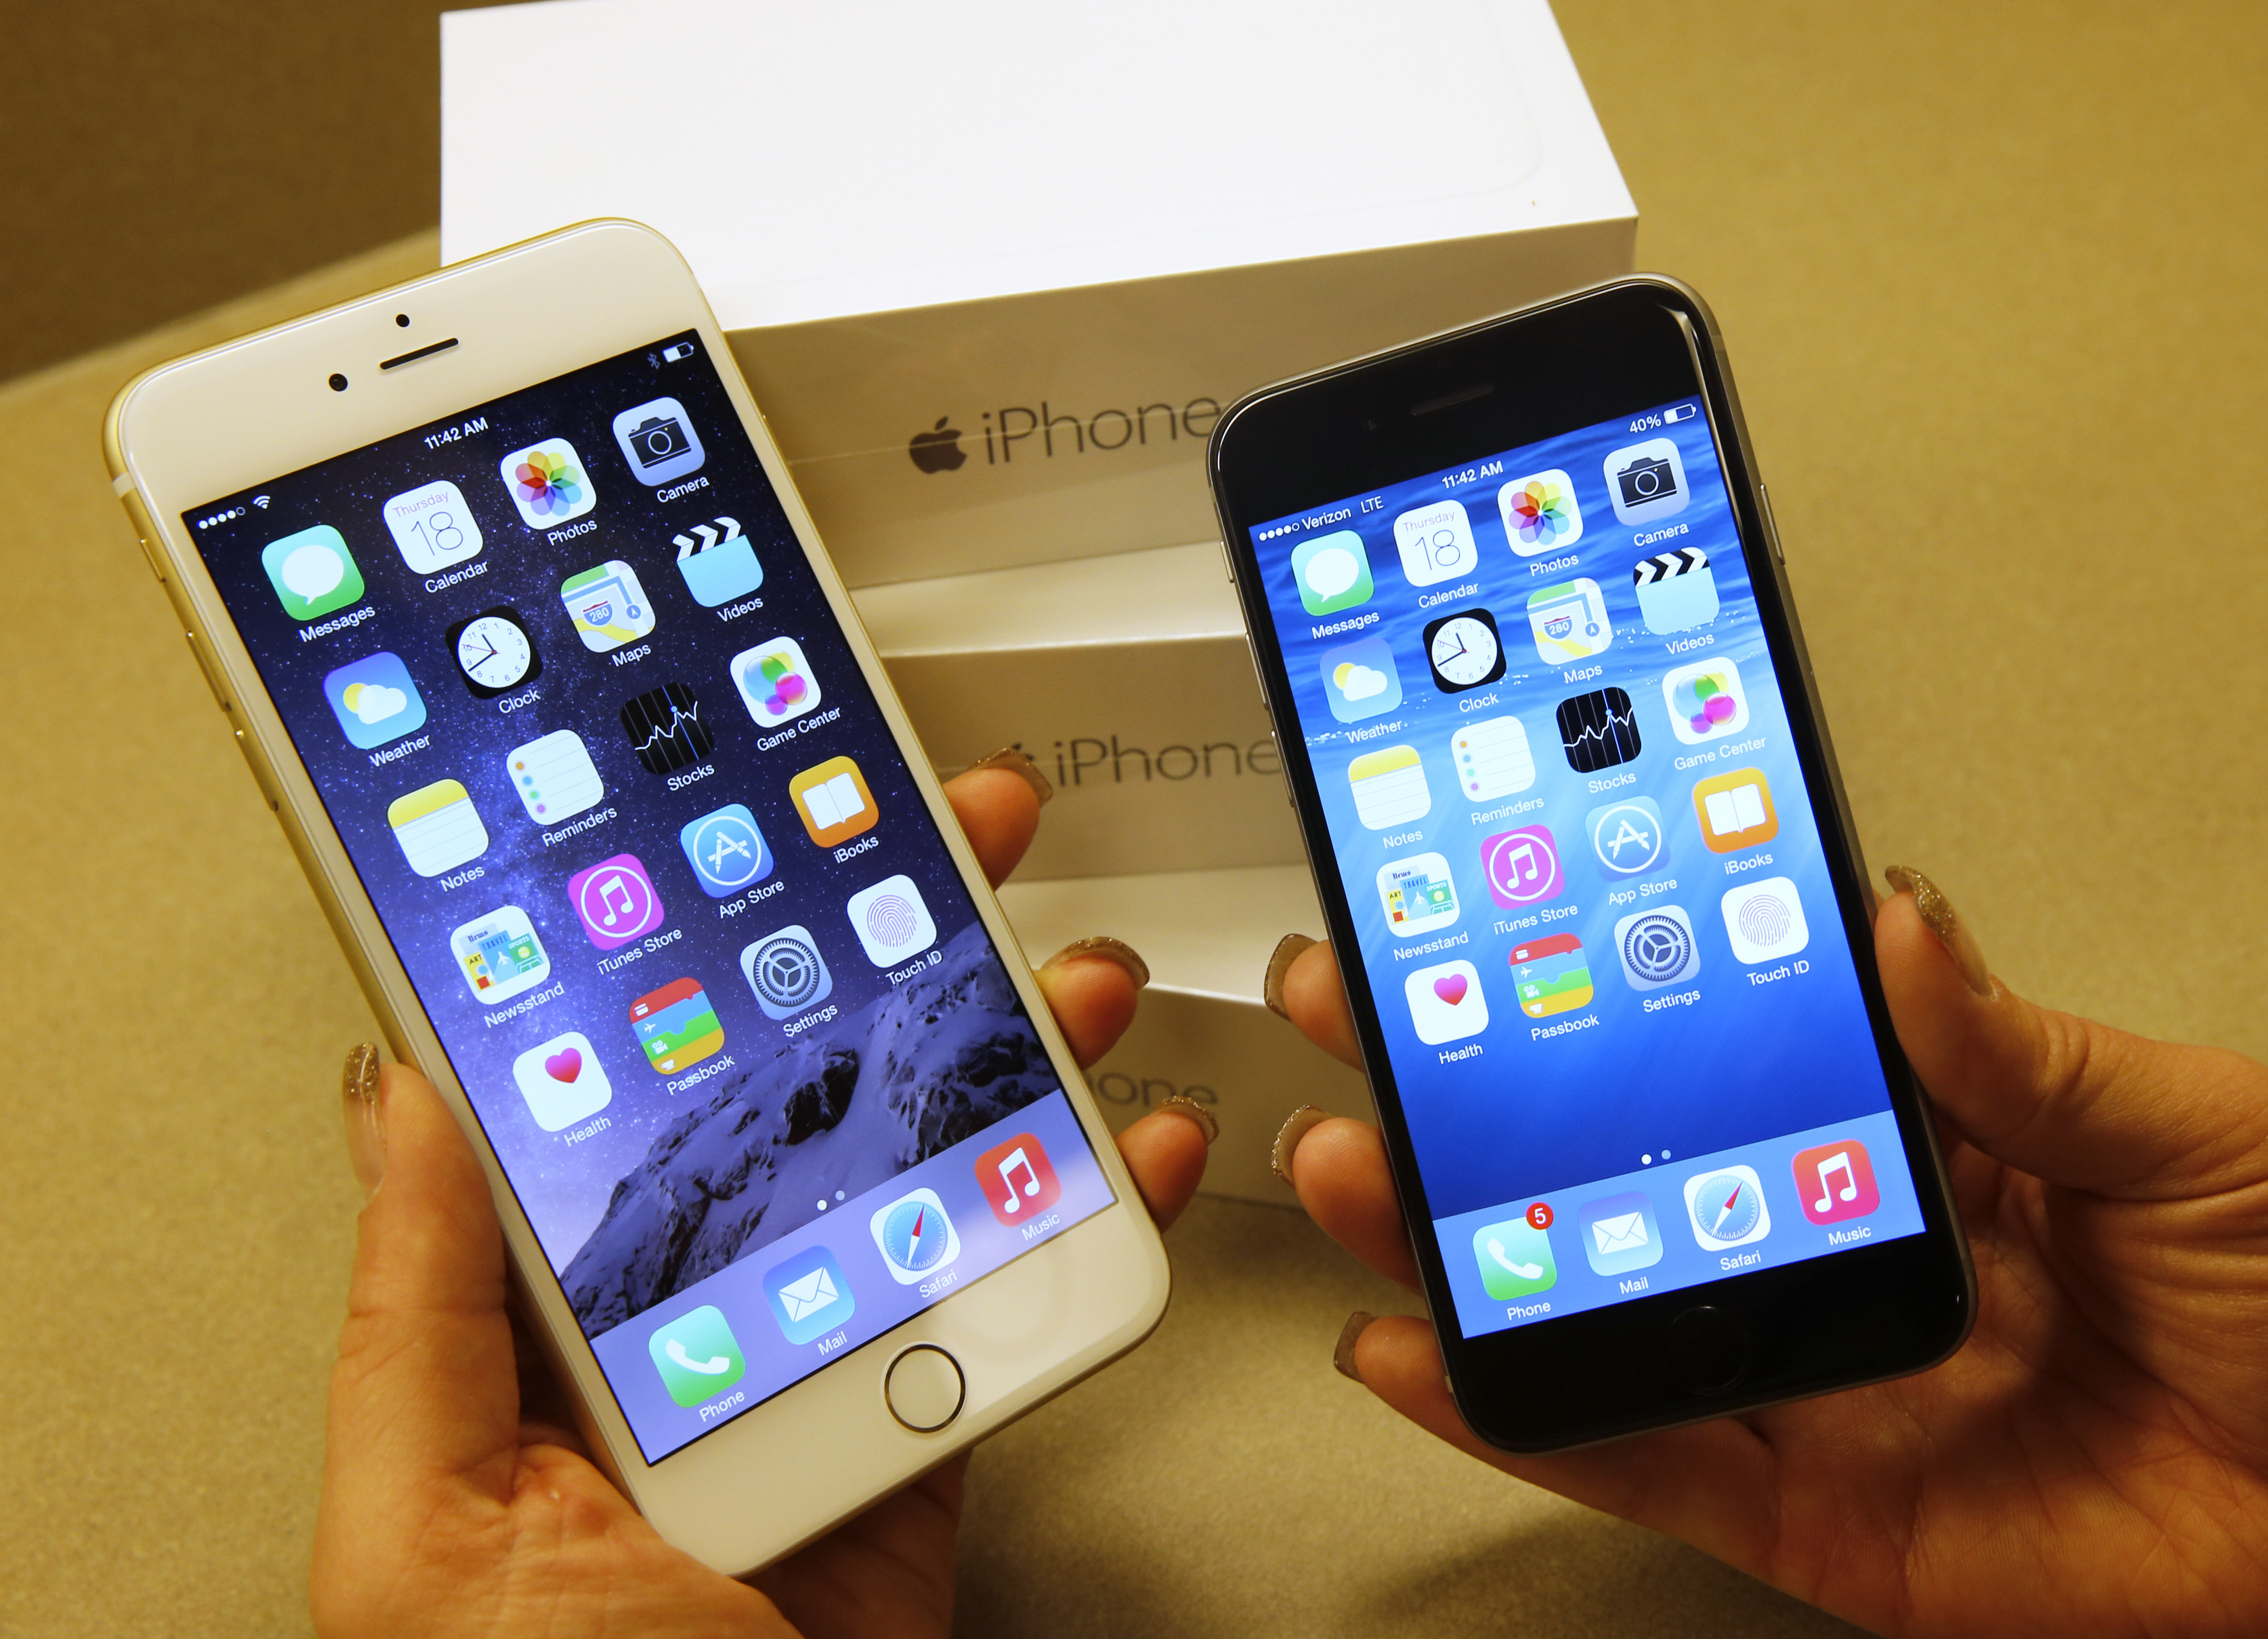 Apple's  iPhone 6 (R) and iPhone 6 Plus (L) phones are shown together at a Verizon store in Orem, Utah on September 18, 2014 in Orem, Utah. (George Frey&mdash;Getty Images)